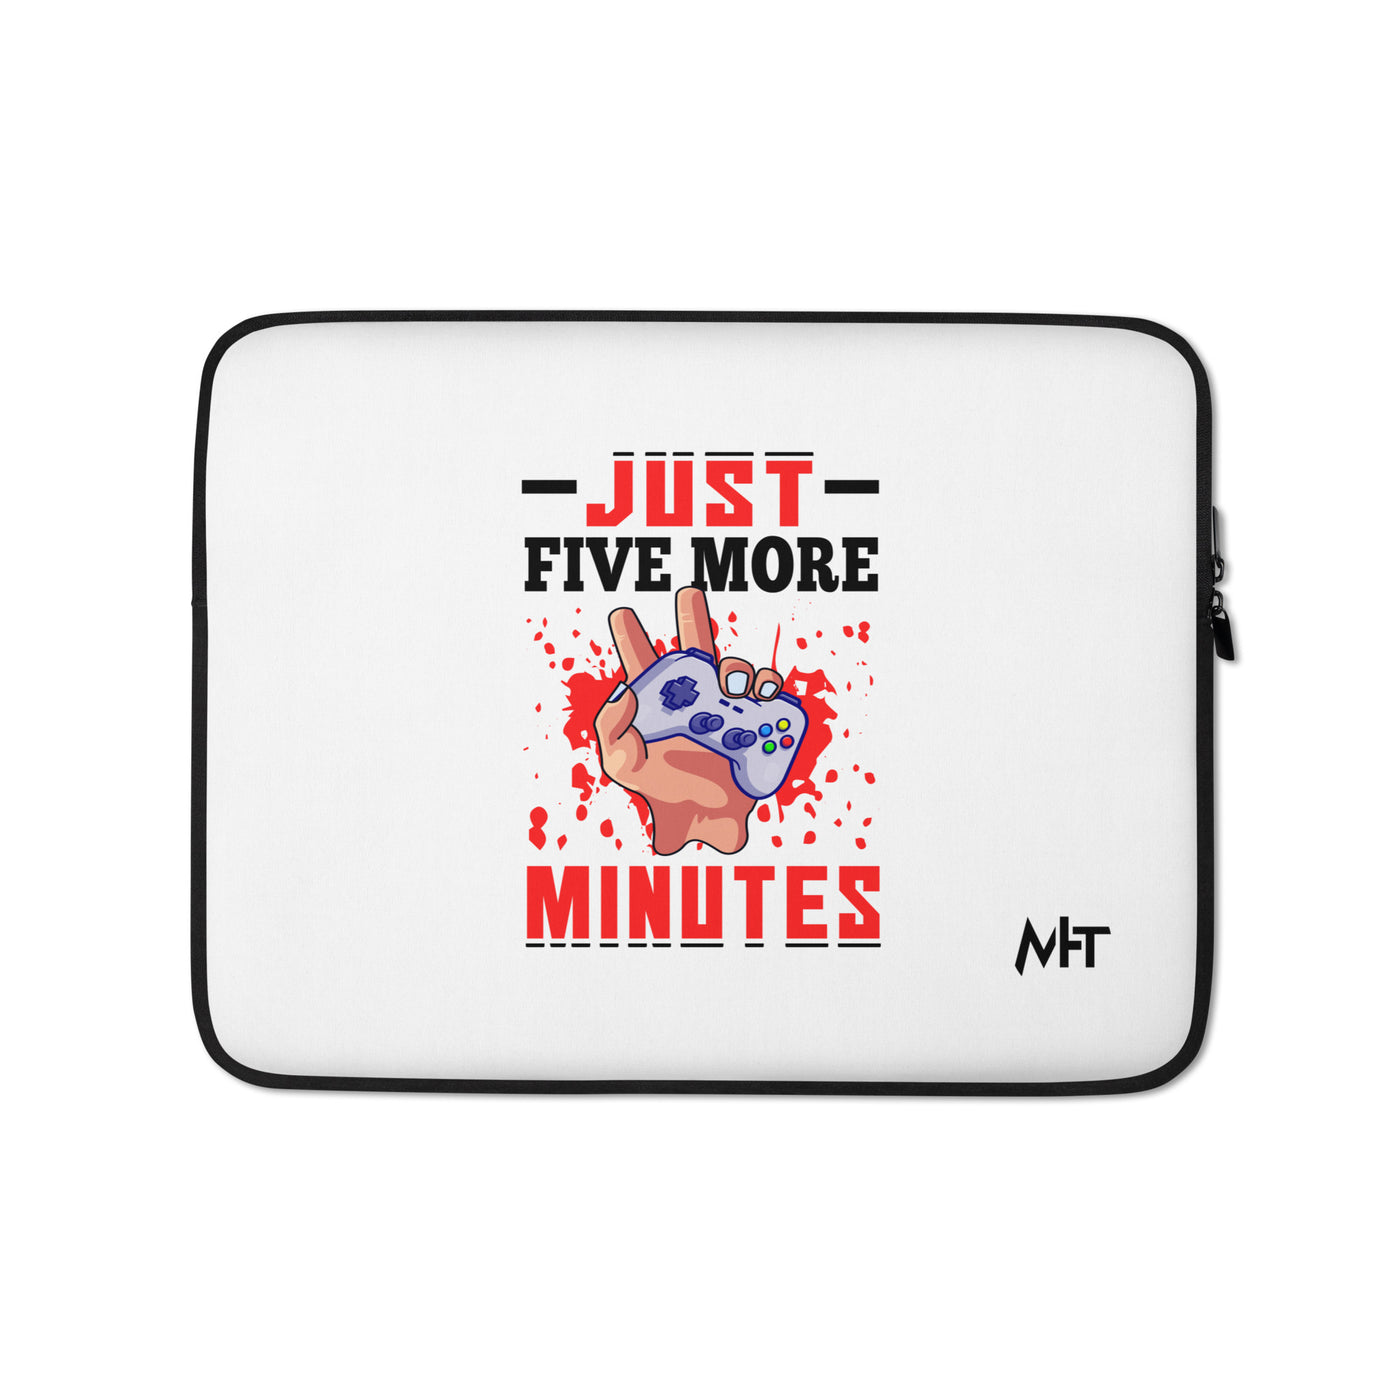 Just 5 more Minutes Rima in Dark Text - Laptop Sleeve